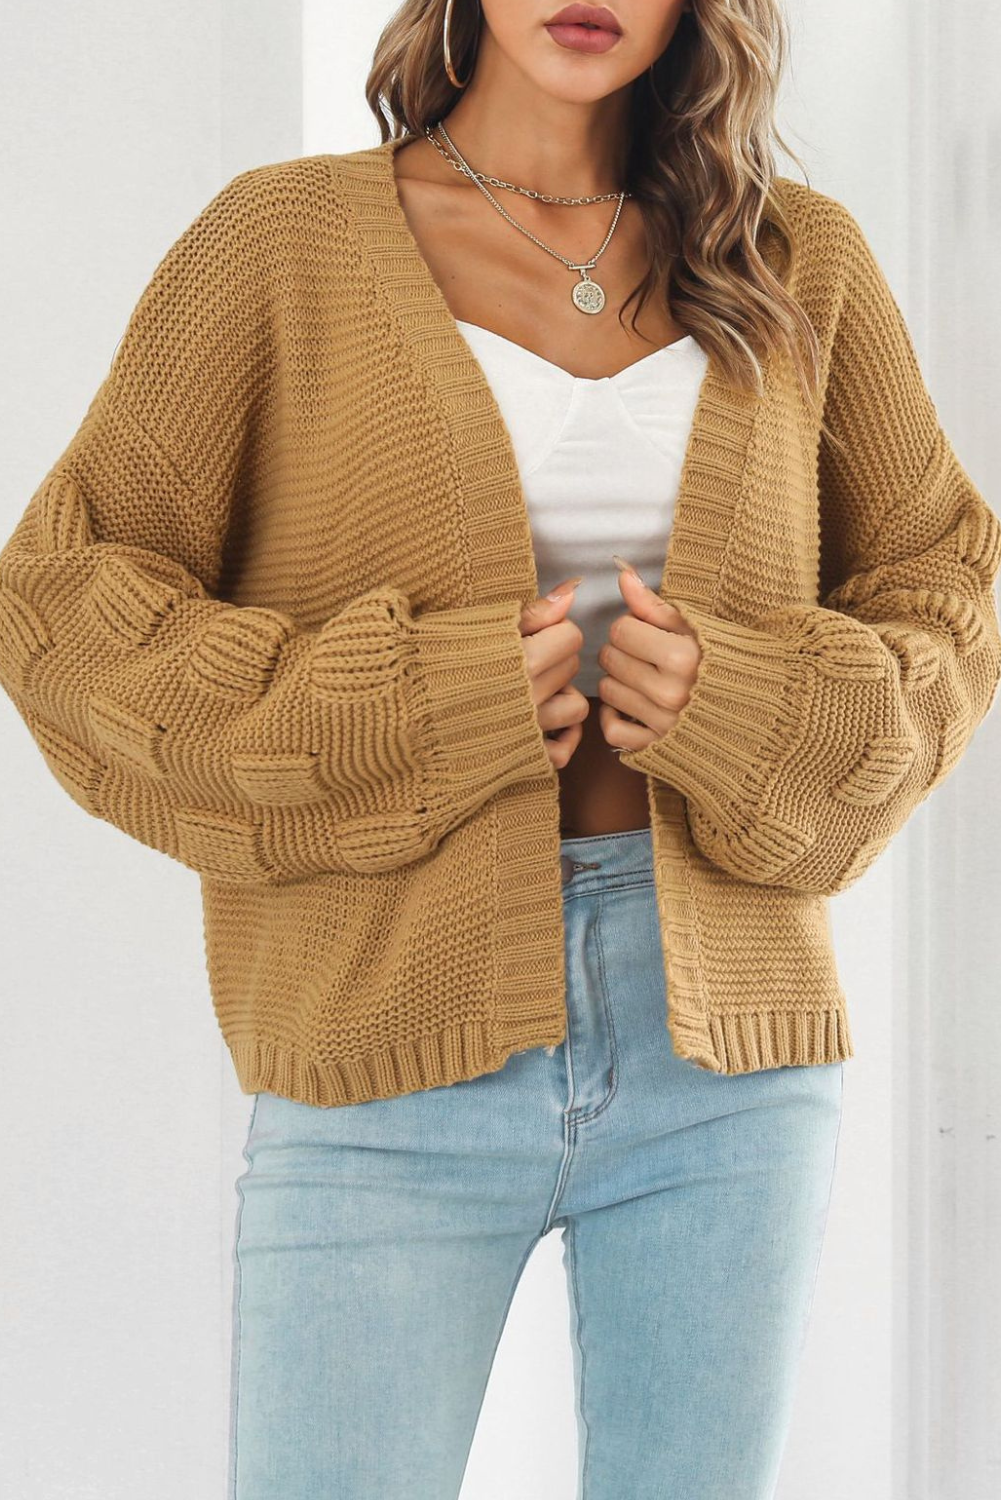 Womens Loose Sweater Open Front Knitted Sleeves Cardigan (2 Colors)